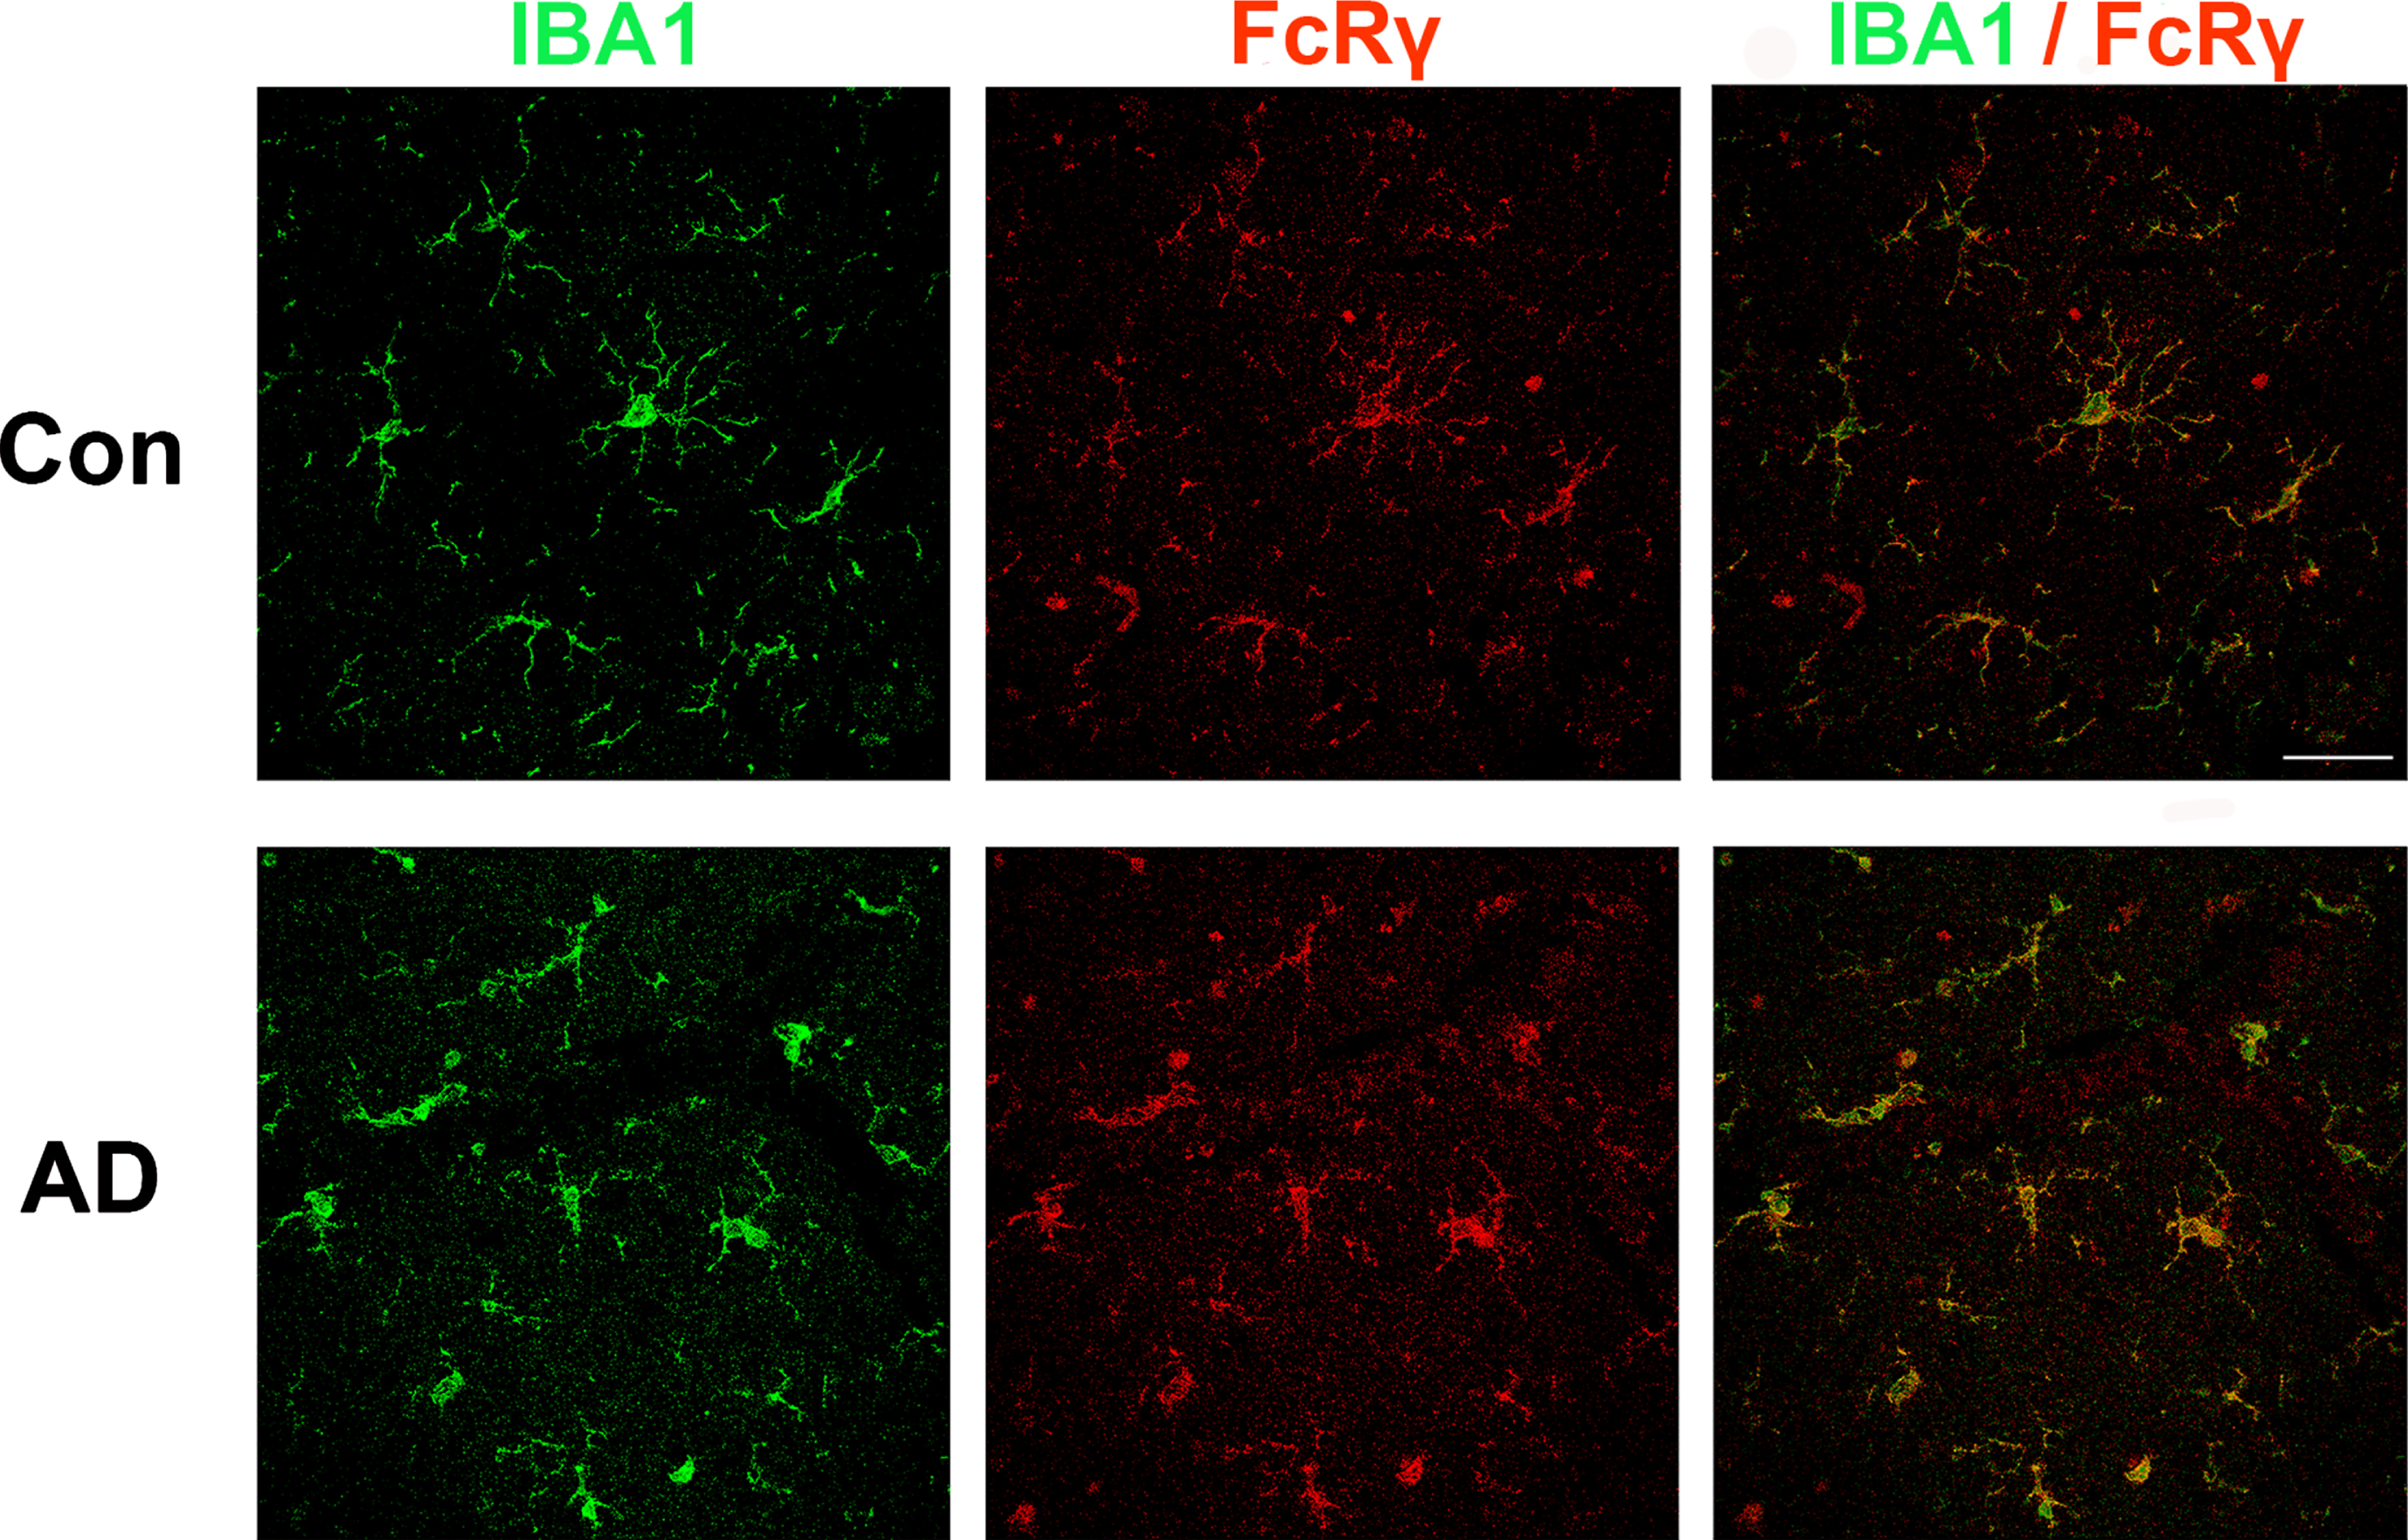 FcRγ and IBA1 co-expression in human brain. Brains sections from individuals with or without AD were immunolabeled for IBA1 (green) and FCER1G (red). The merged image at the right shows that cells labeled by FcRγ are also labeled by IBA1, consistent with the concept that FcRγ is primarily expressed by microglia in the brain. Scale bar = 50μm.